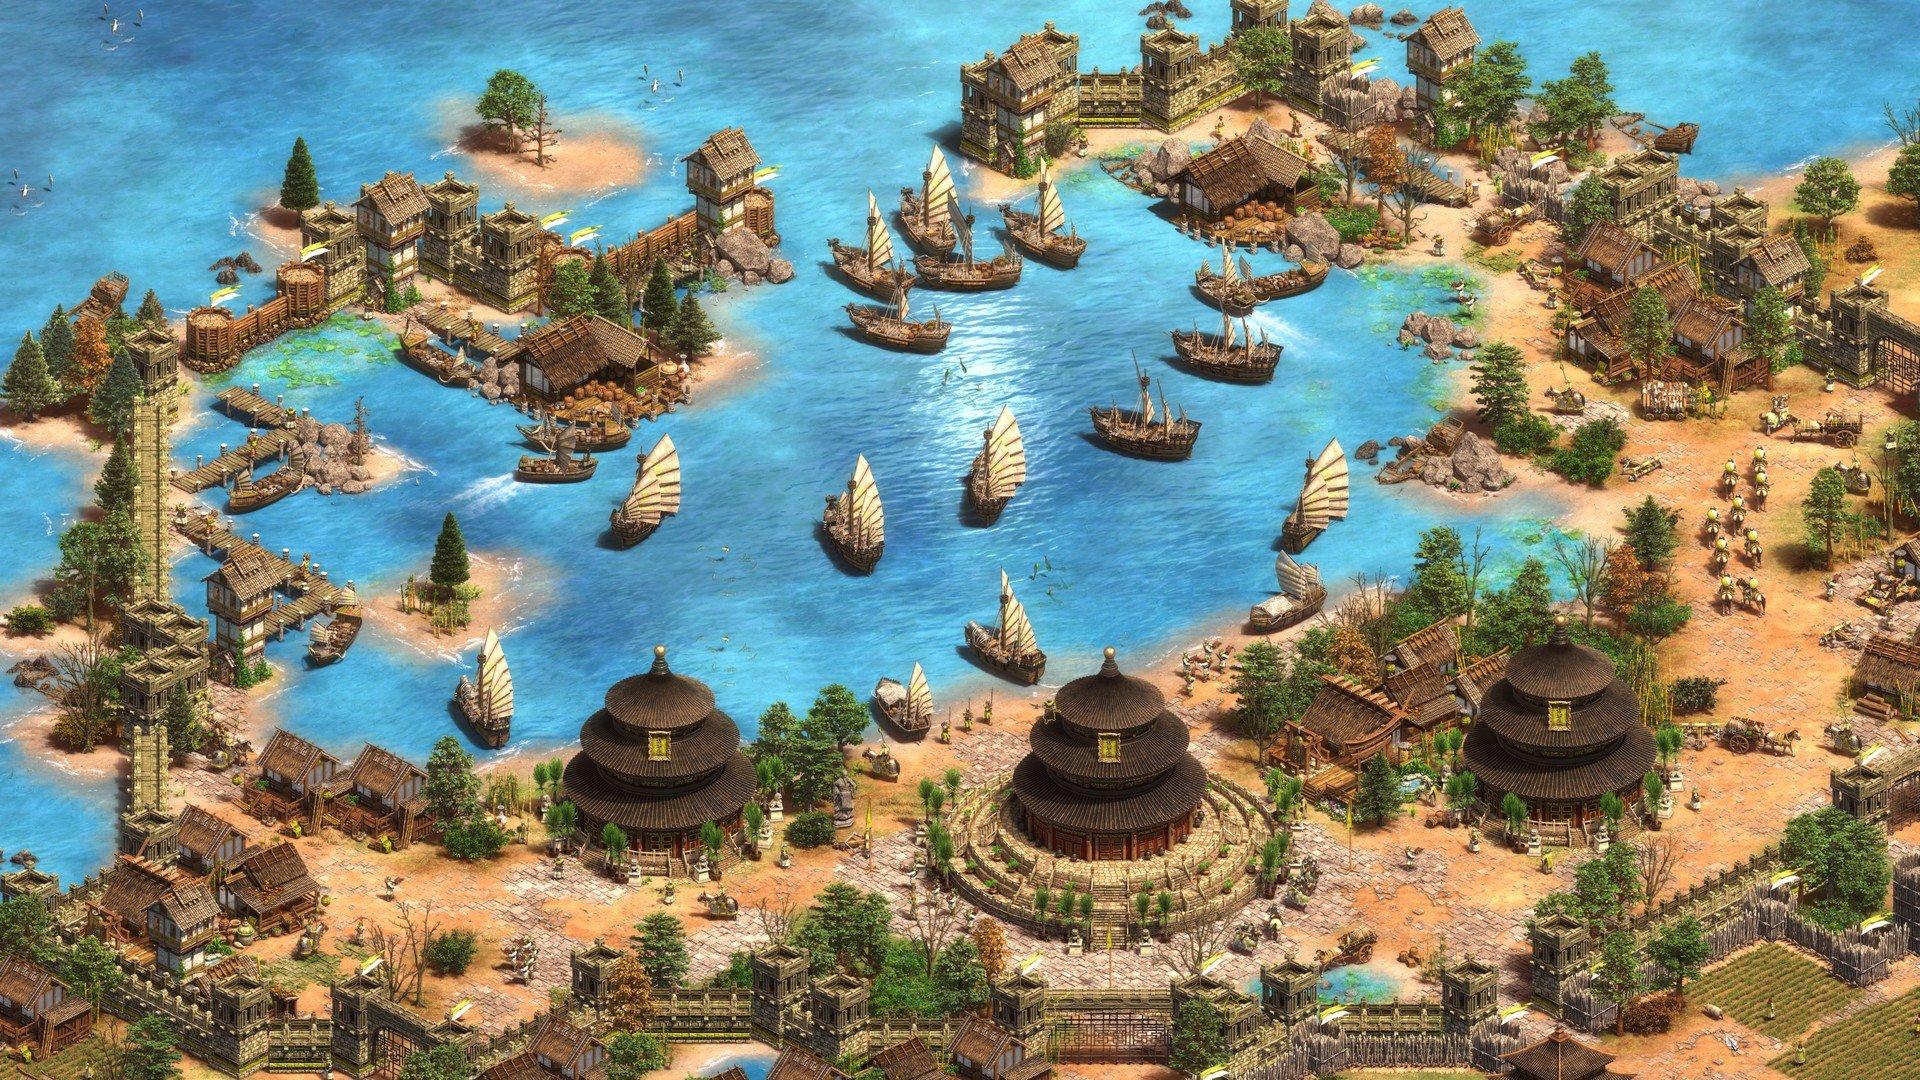 Age of Empires II: Definitive Edition lives up to its title